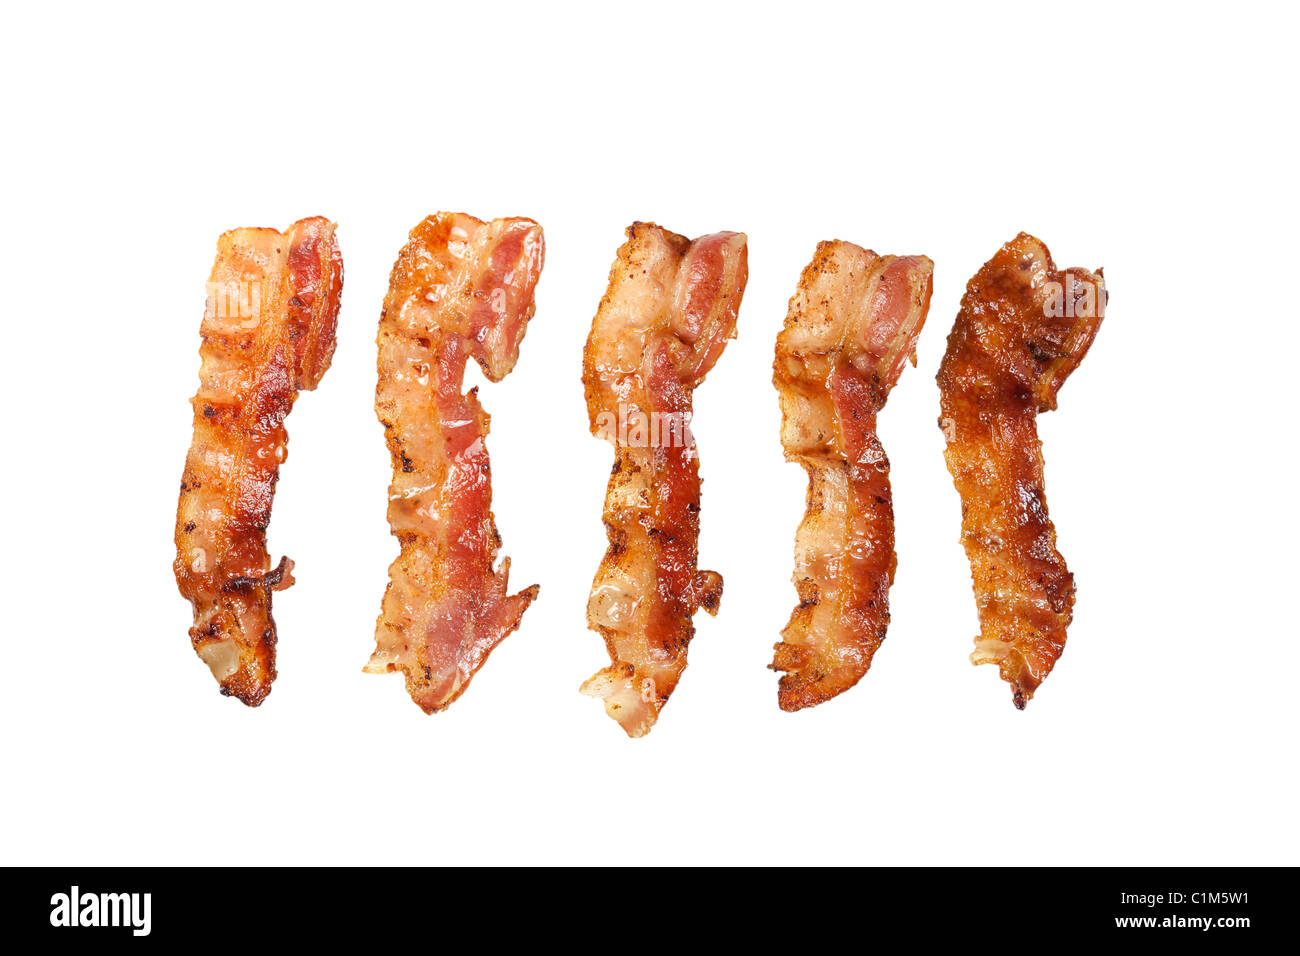 Cooked bacon isolated on white background. Charles Lupica Stock Photo